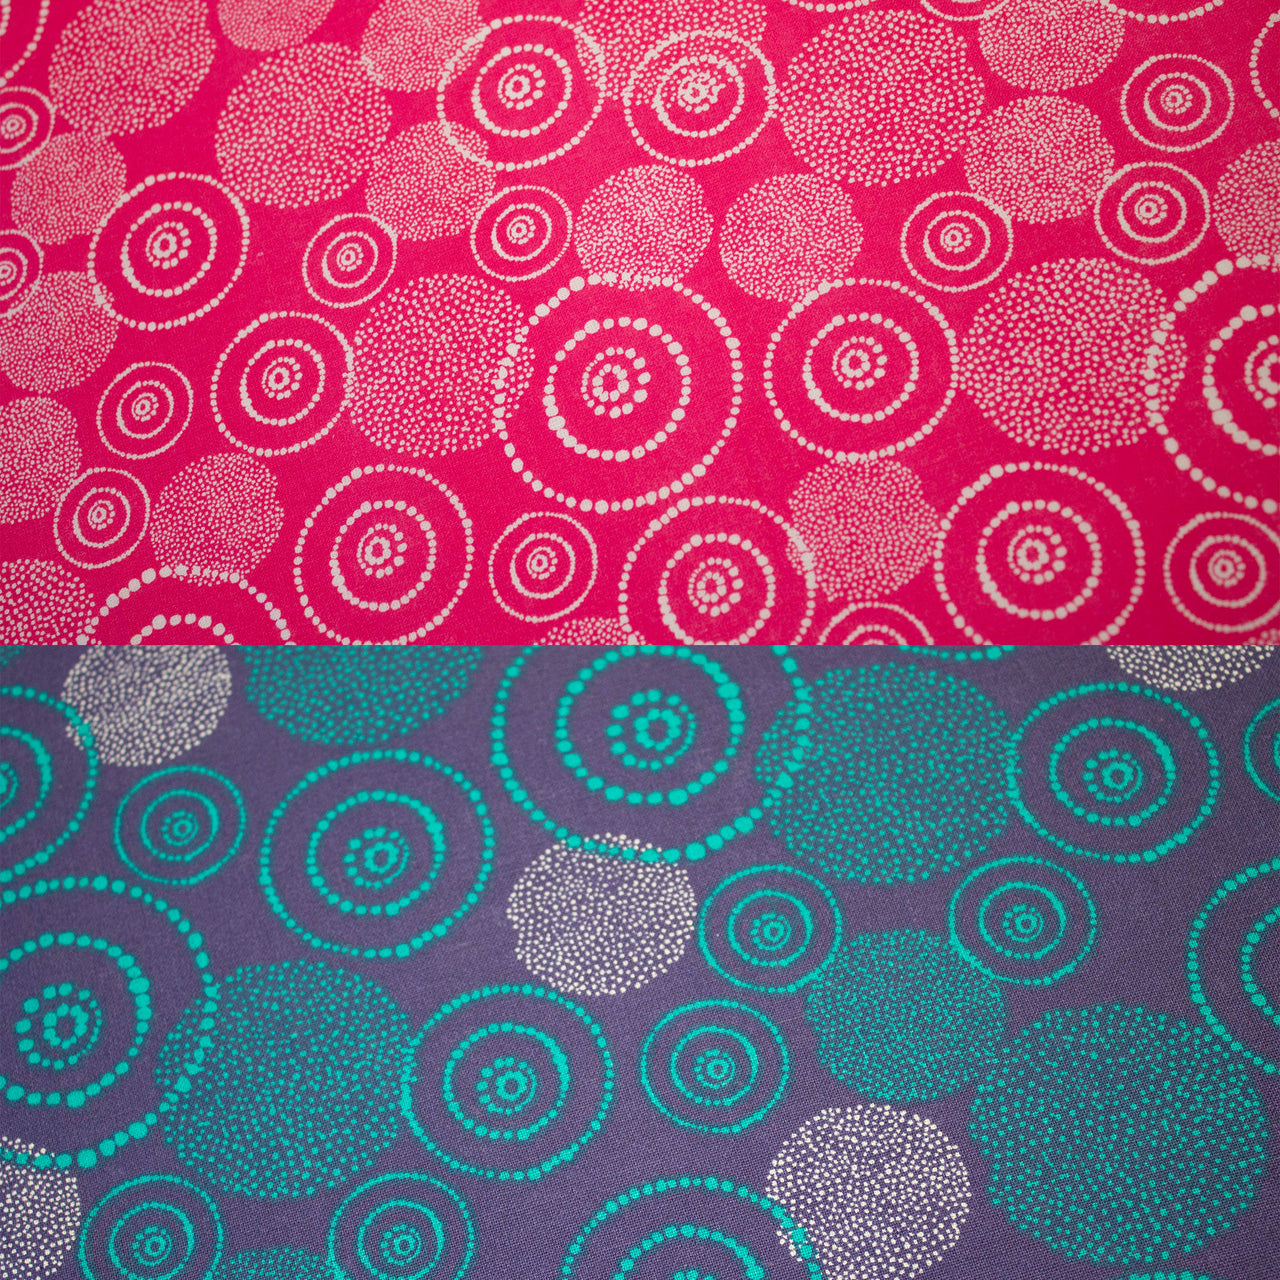 Geometric Circle Design on Printed Cotton Fabric - Available in Pink and Purple